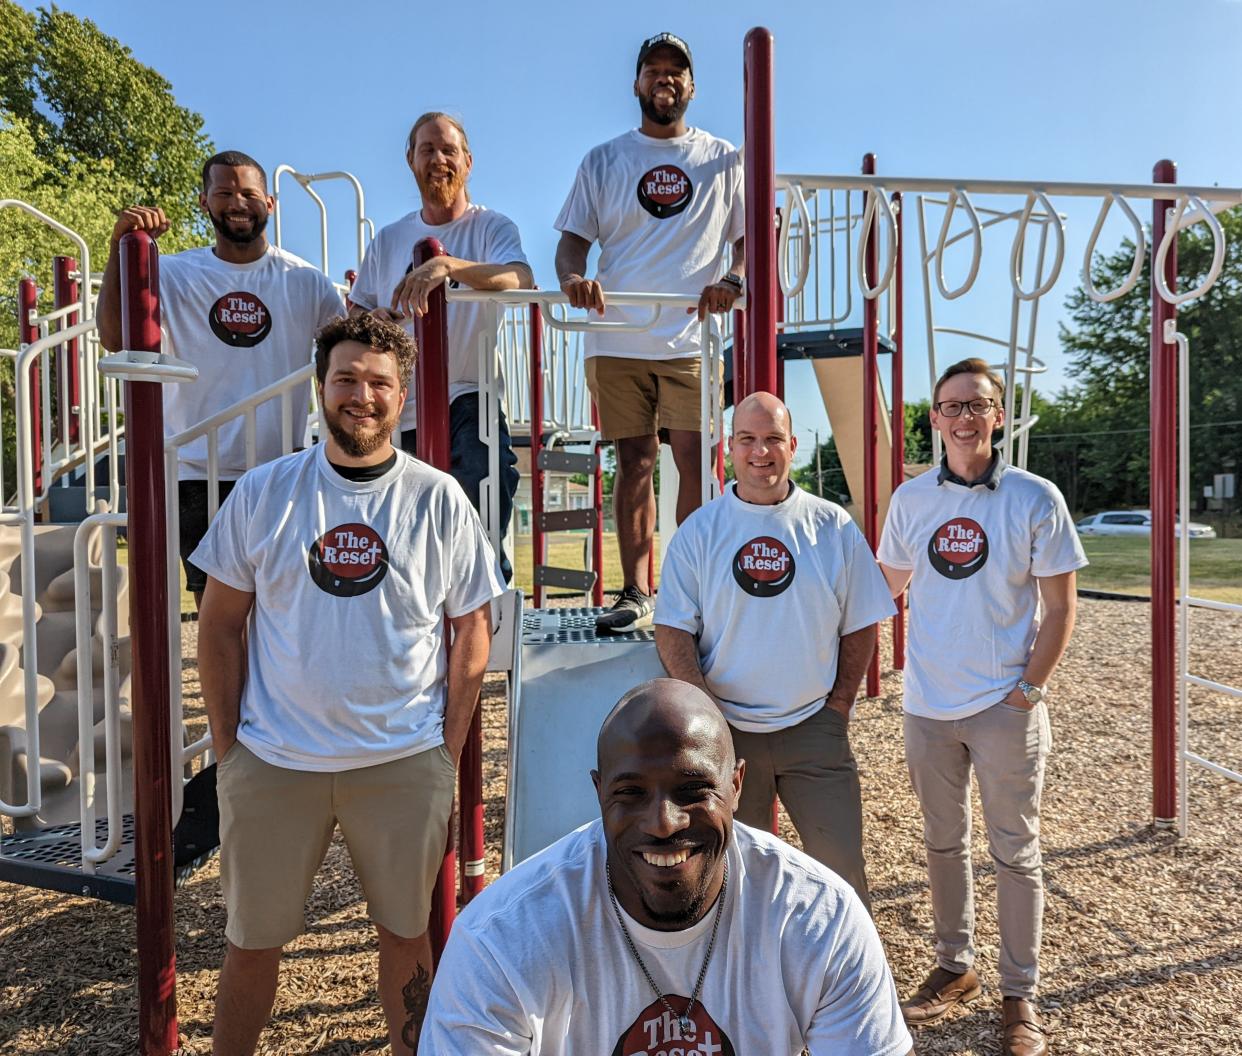 These men are hosting The Reset, a four-week mission aimed at youth and set to take place in two Canton parks on Thursdays in July. They include (front) Brent Walker; (left to right) Billy Parsons, Chris McGowan, the Rev. Michael Gammill; (second row, left to right) Michael Carlton, Teddy Seely and Bradley Tyson. Not pictured is Alex Orenuga.